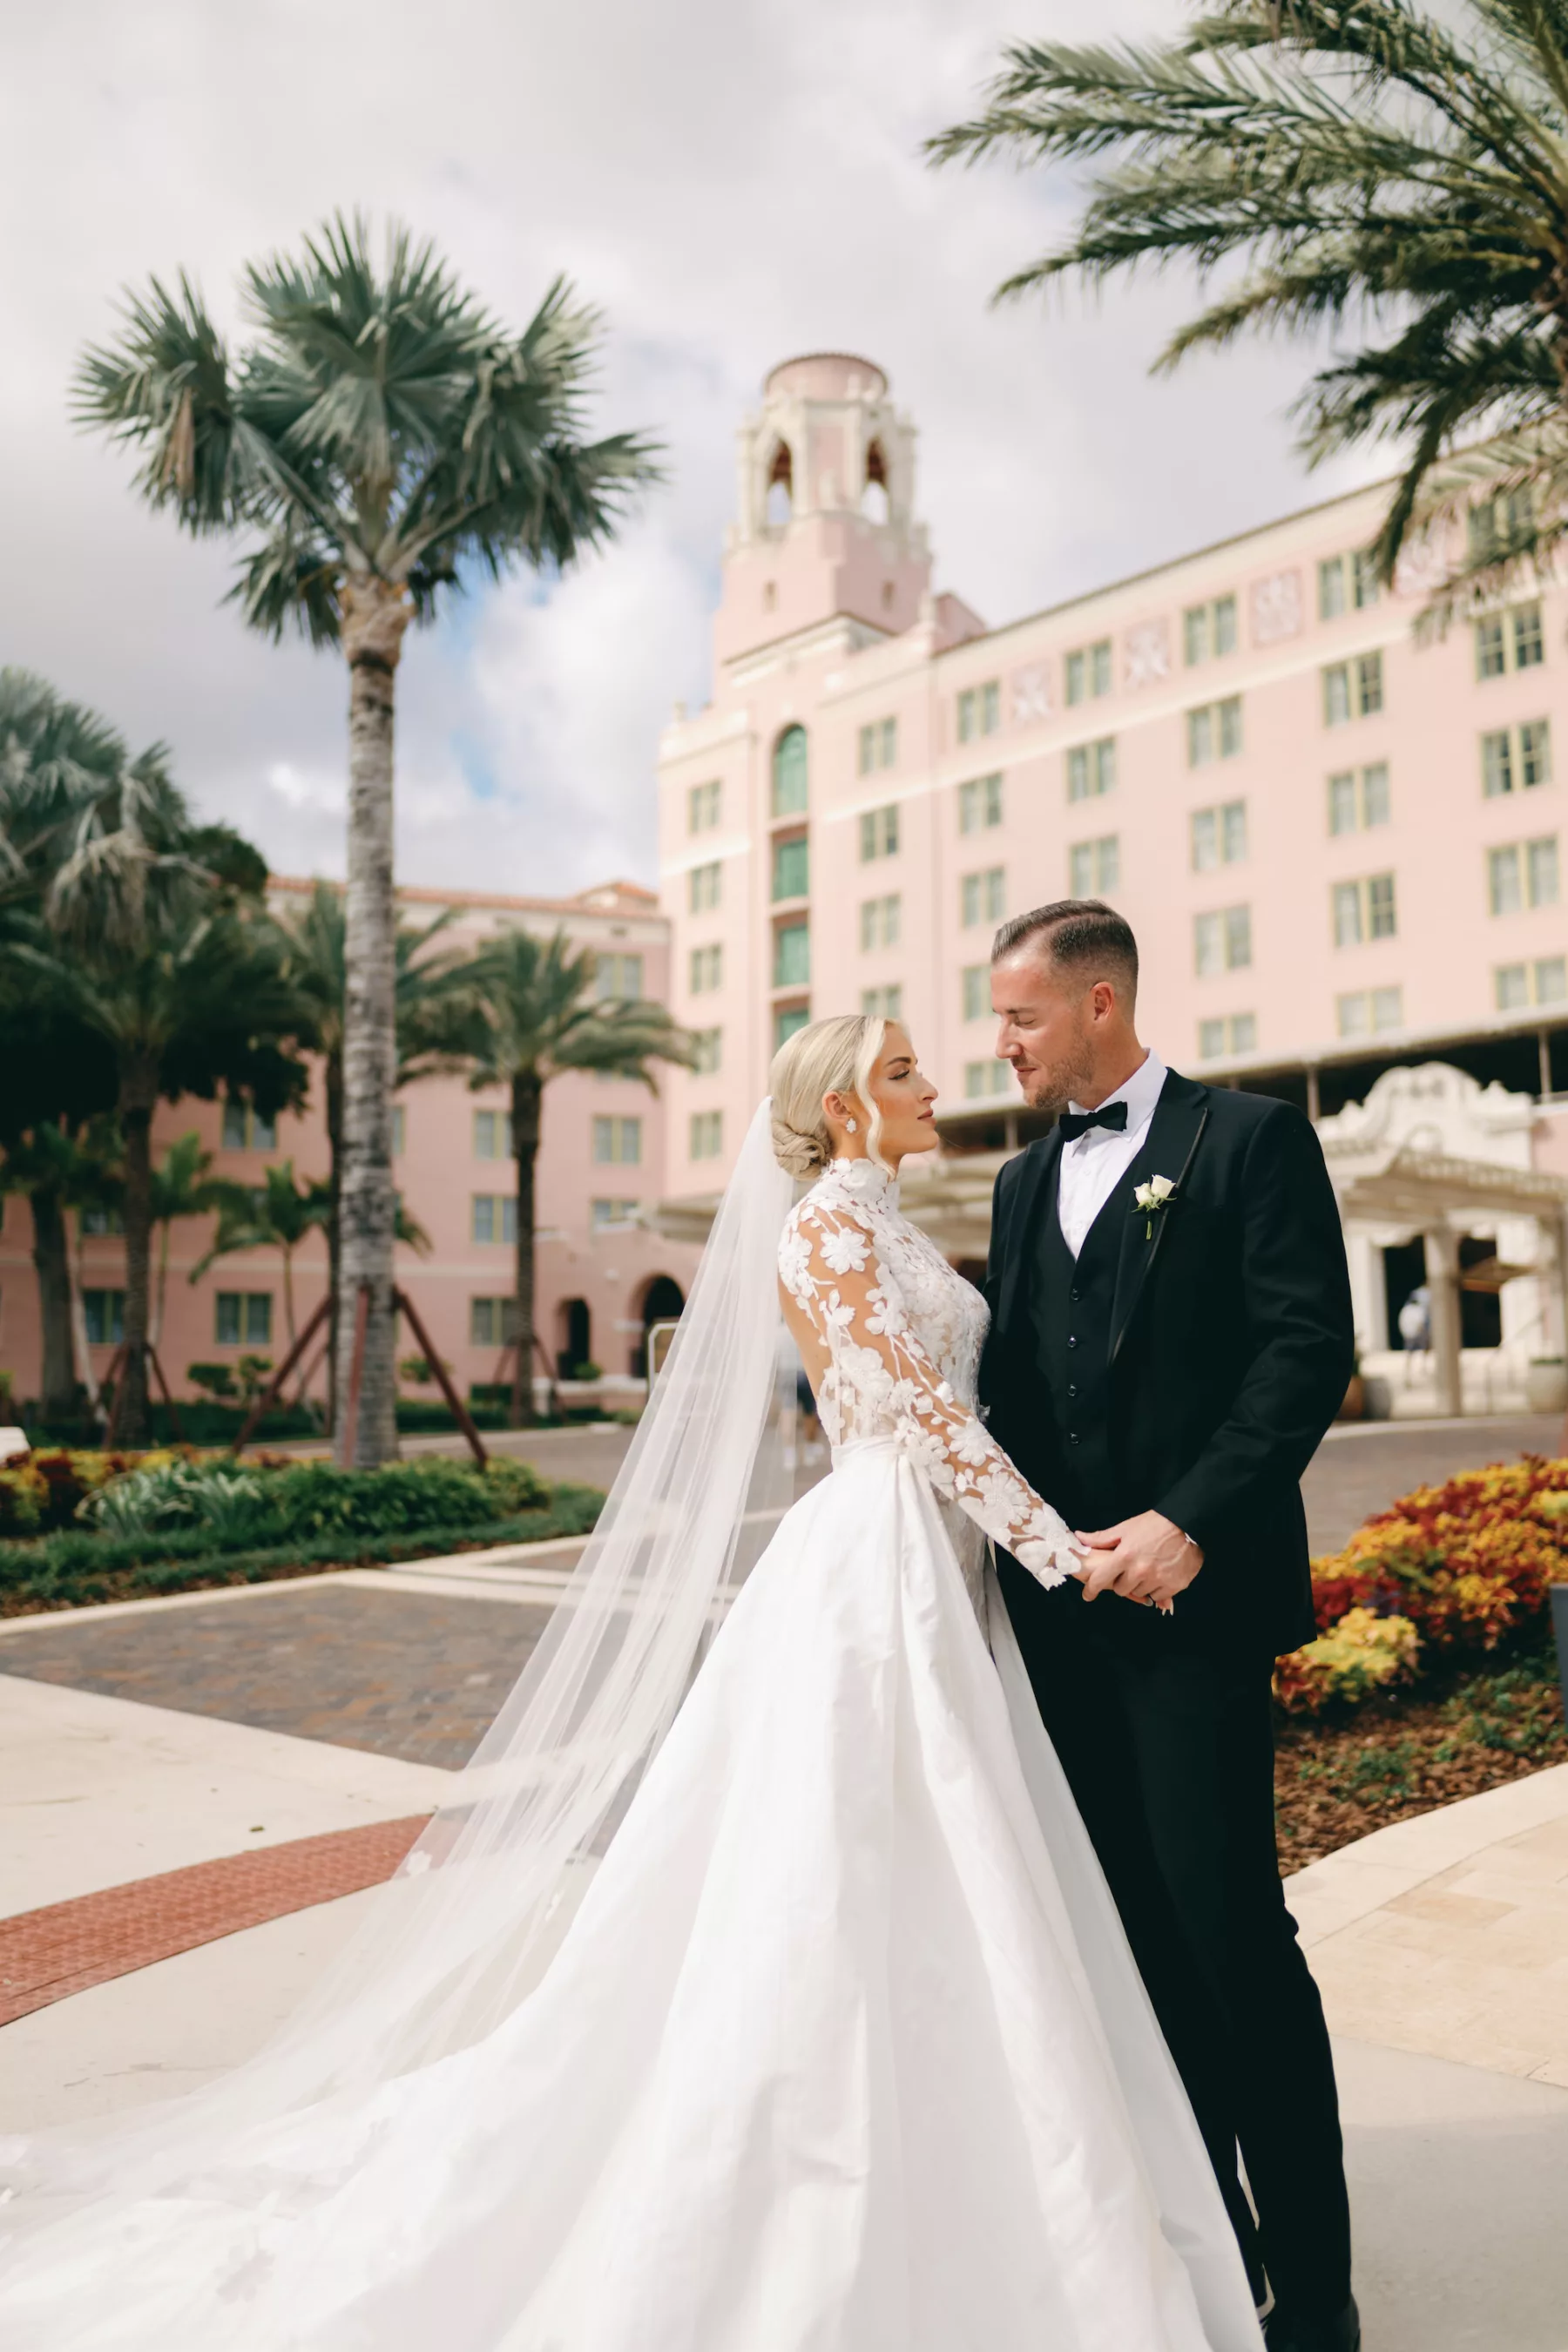 Bride and Groom First Look Wedding Portrait | St Pete Historic Hotel Venue The Vinoy